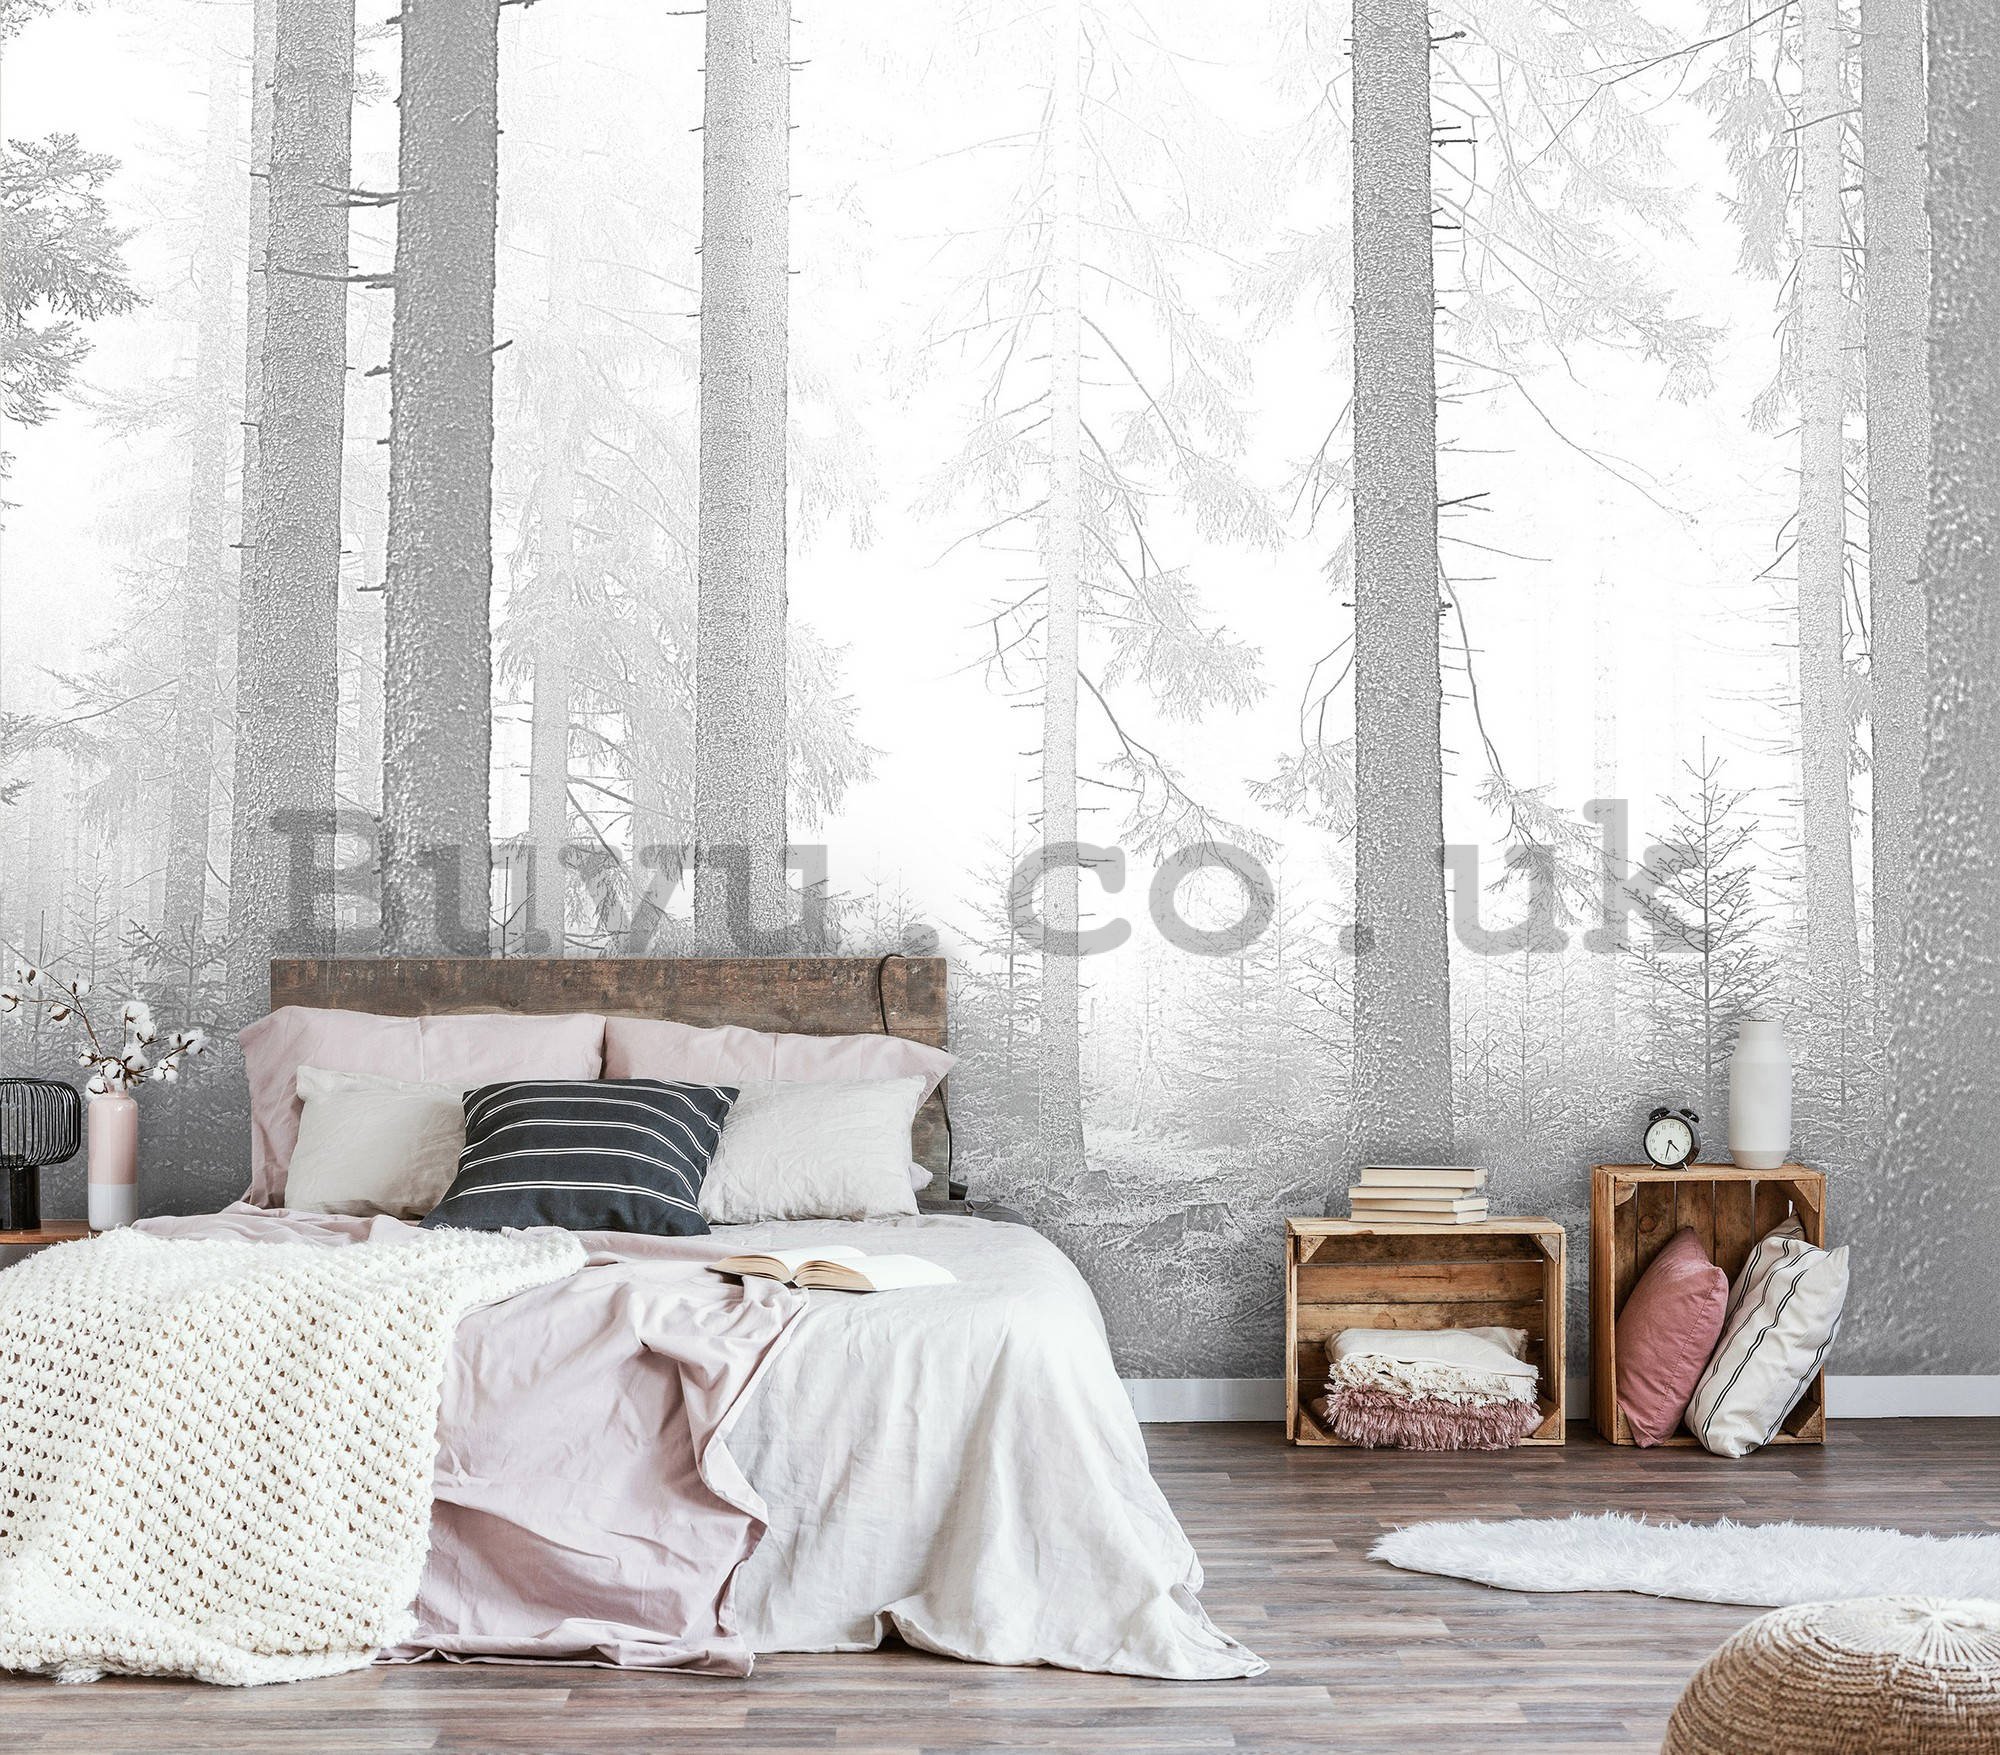 Wall mural vlies: Black and white forest (3) - 368x254 cm